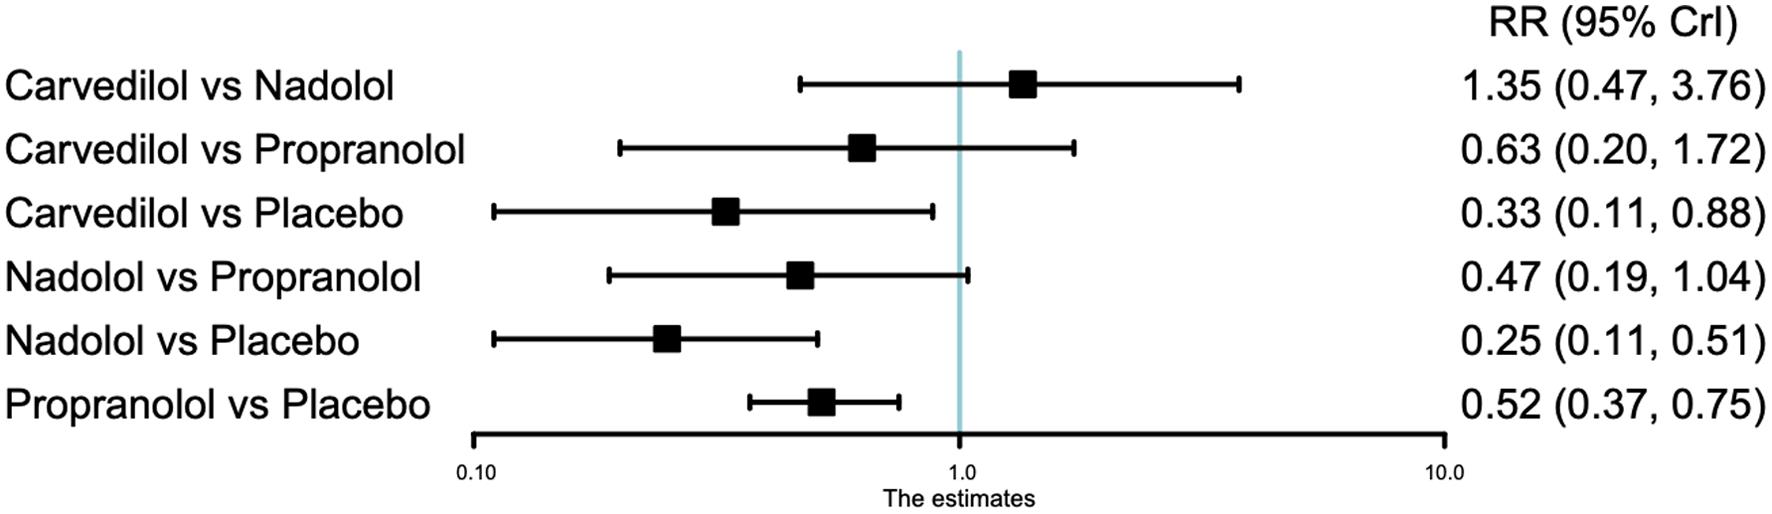 Network forest plot of primary/secondary prophylaxis of variceal bleeding in six direct and indirect comparisons.